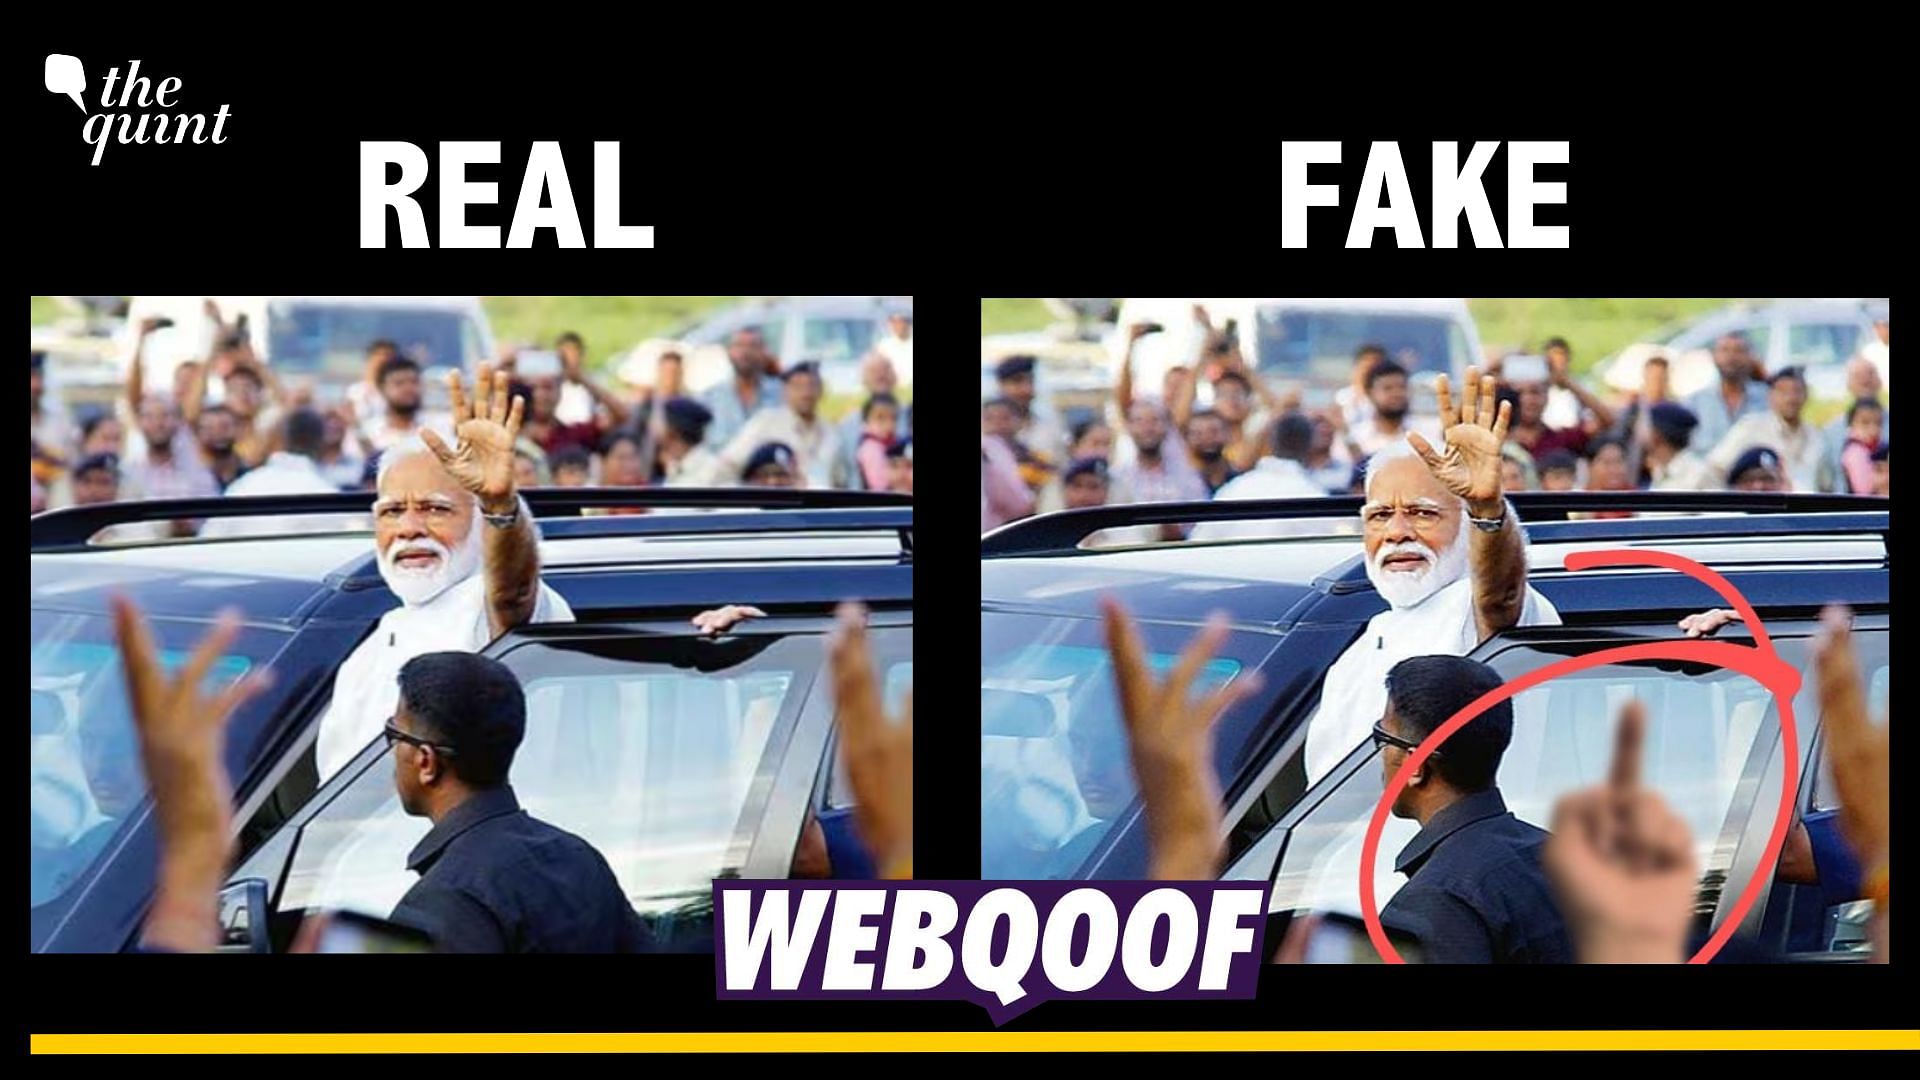 Edited Image Showing a Disrespectful Hand Gesture Towards PM Modi Goes Viral